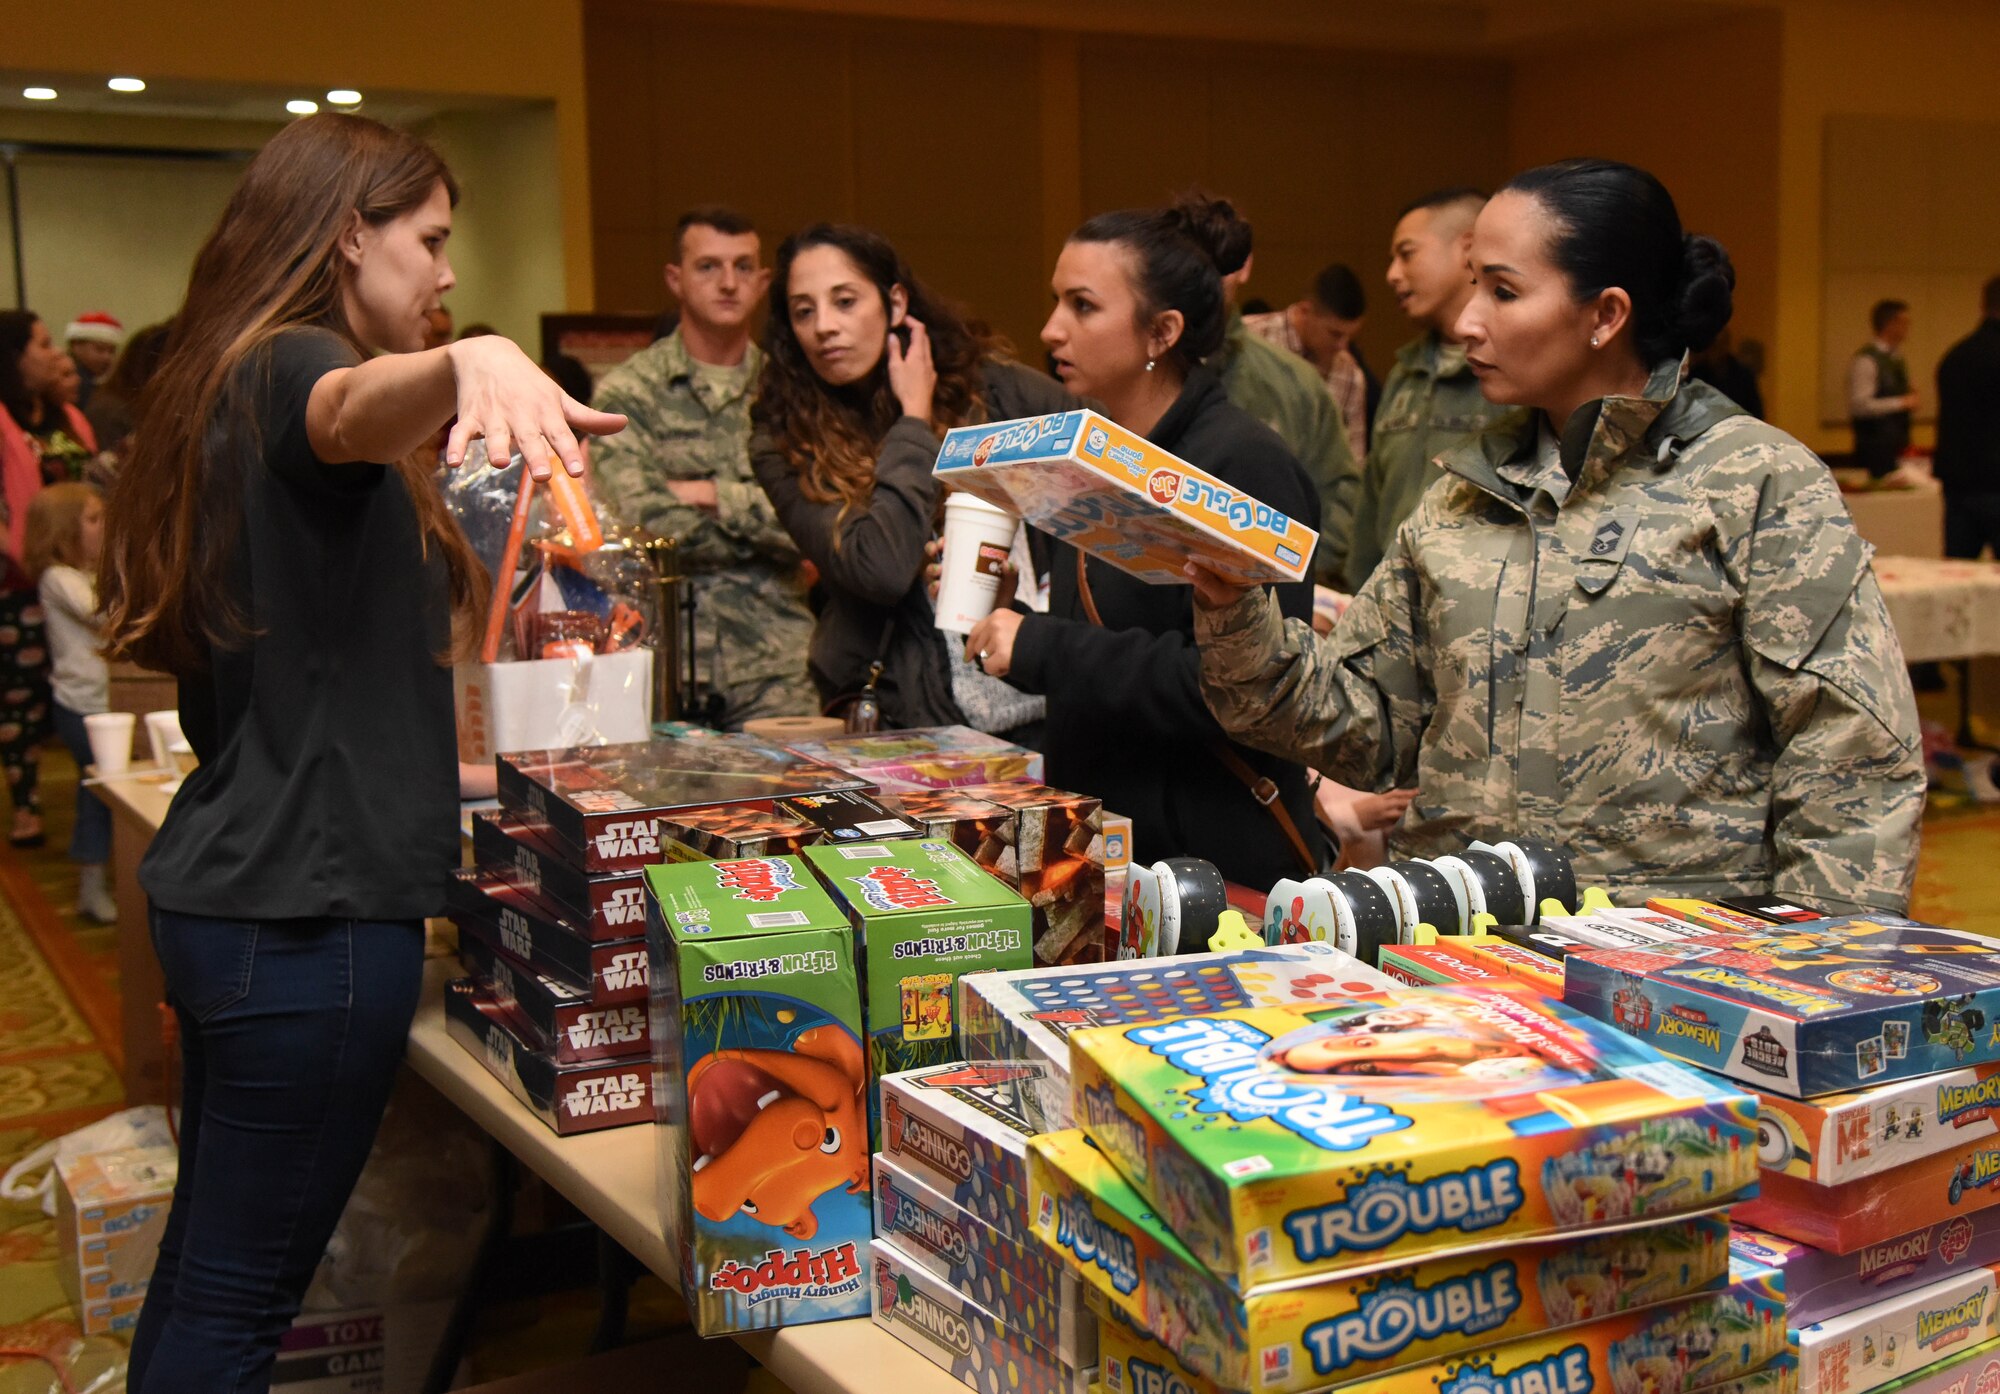 Heather Altman, spouse of Staff Sgt. Gabriel Altman, 335th Training Squadron instructor, assists Keesler families at the gift table during Keesler’s annual Christmas celebration at the Bay Breeze Event Center Dec. 7, 2017, on Keesler Air Force Base, Mississippi. The event, hosted by Outdoor Recreation, included cookie and ornament decorating, games and visits with Santa. (U.S. Air Force photo by Kemberly Groue)